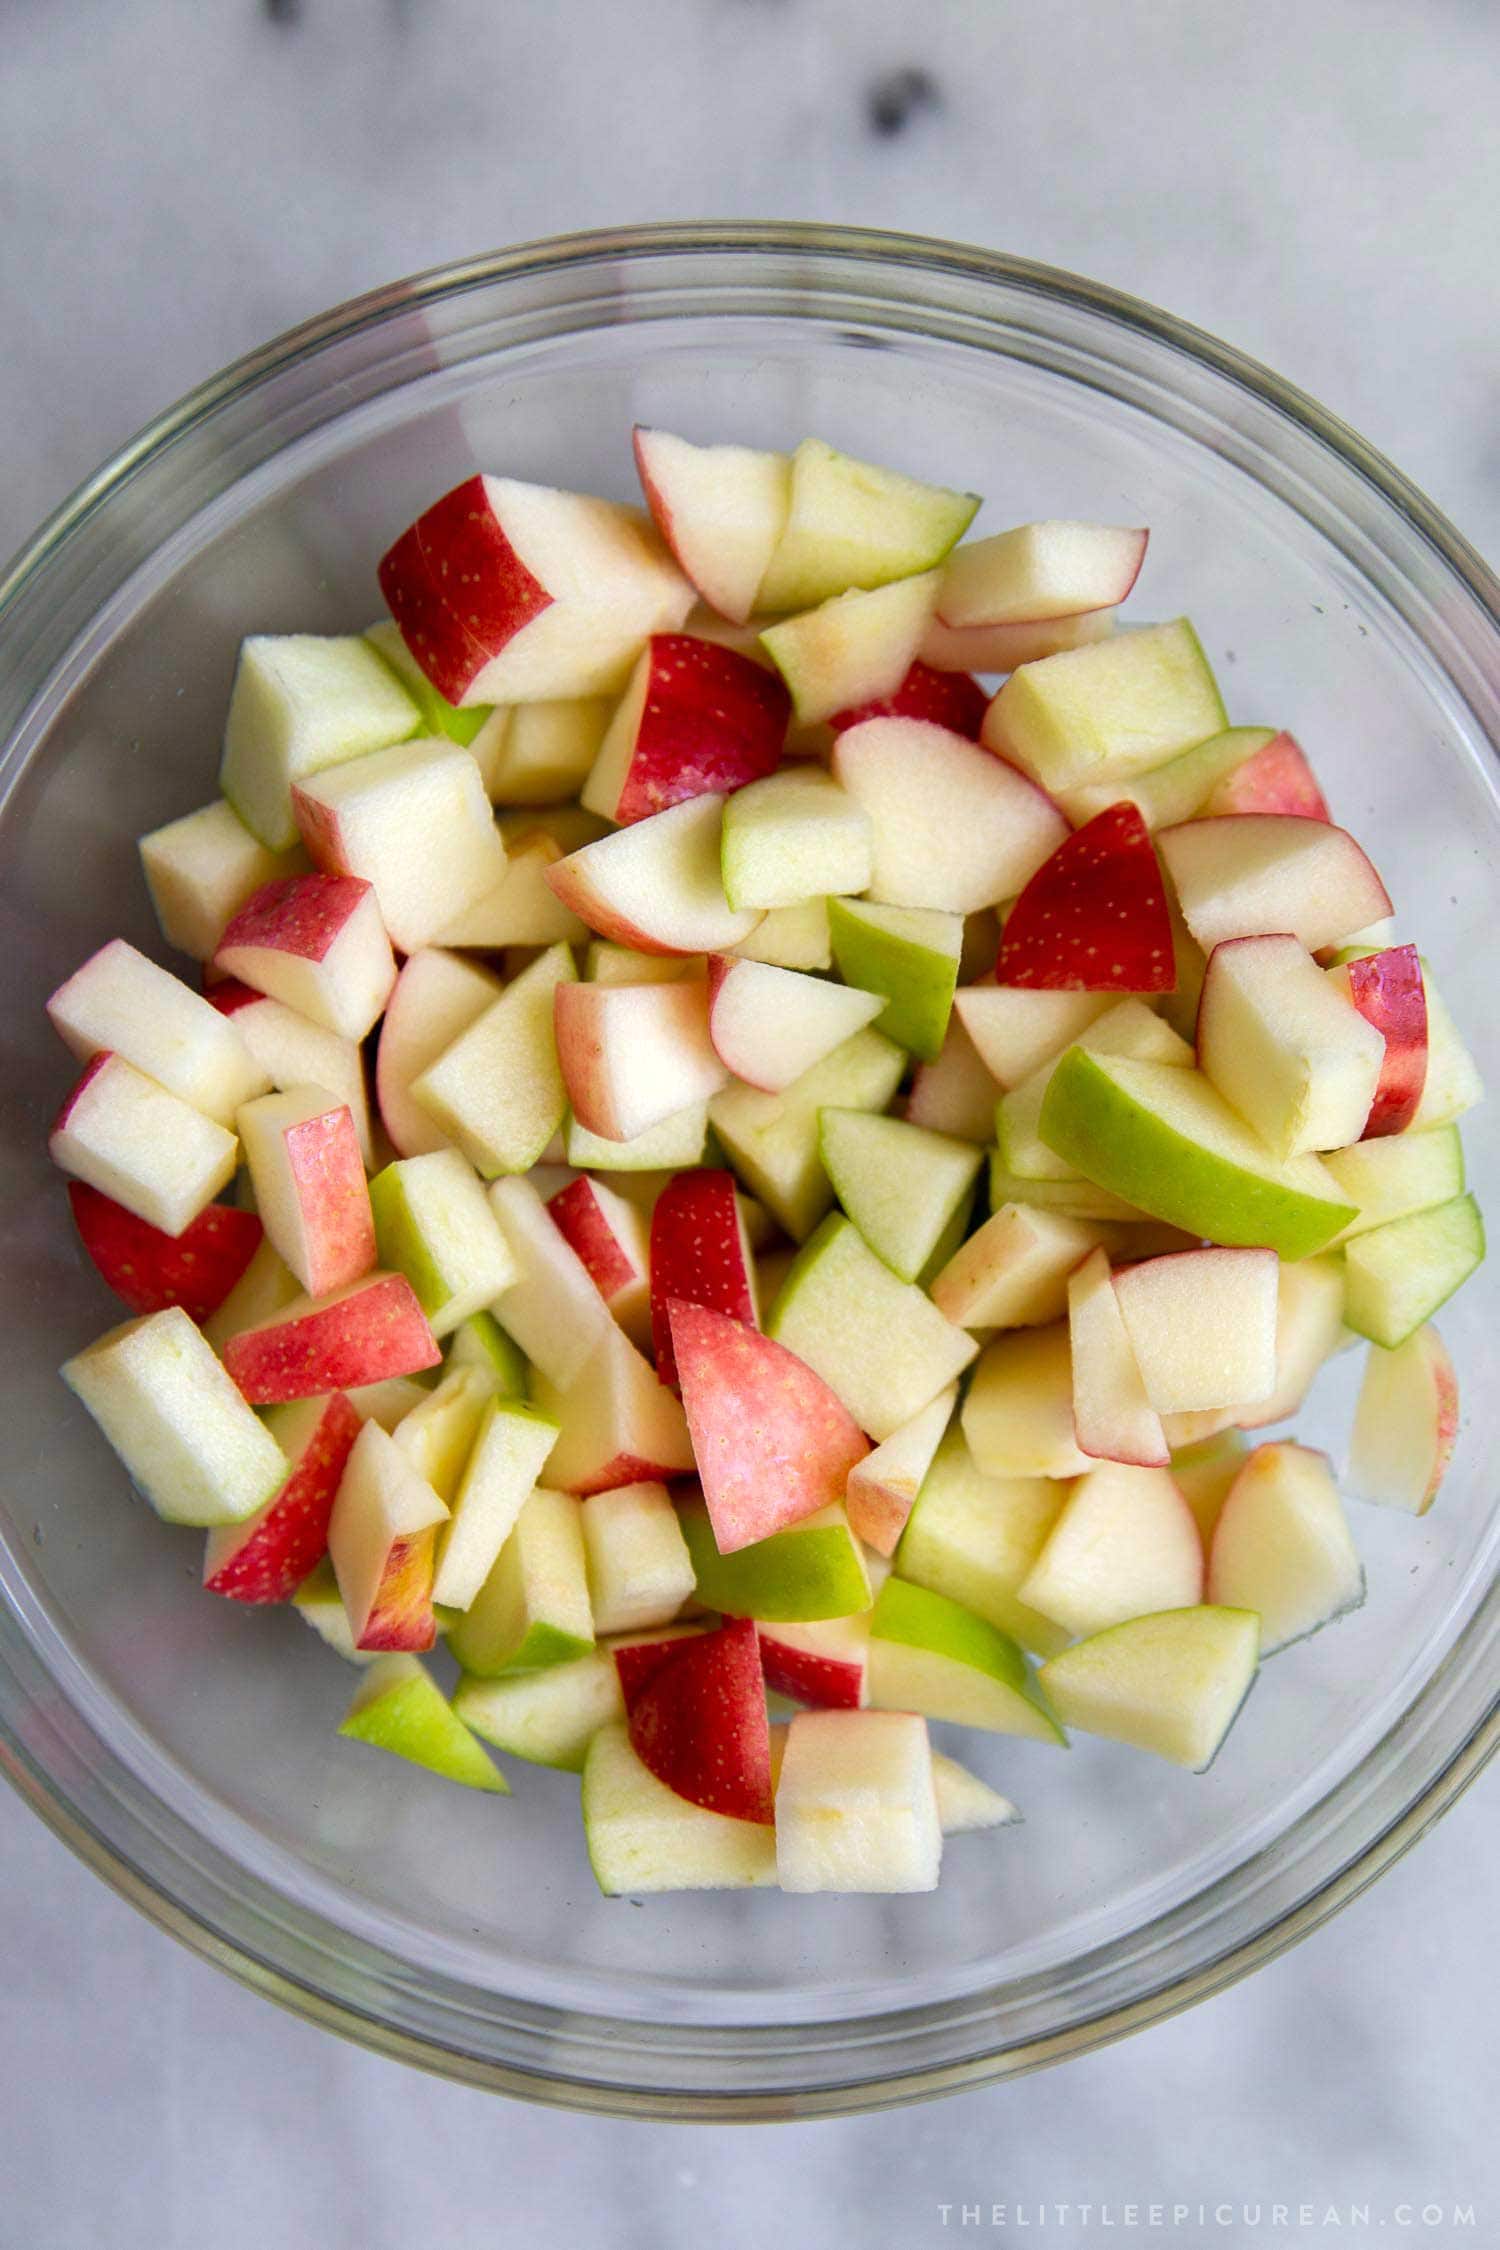 Mixture of chopped Granny Smith and Honeycrisp apples.